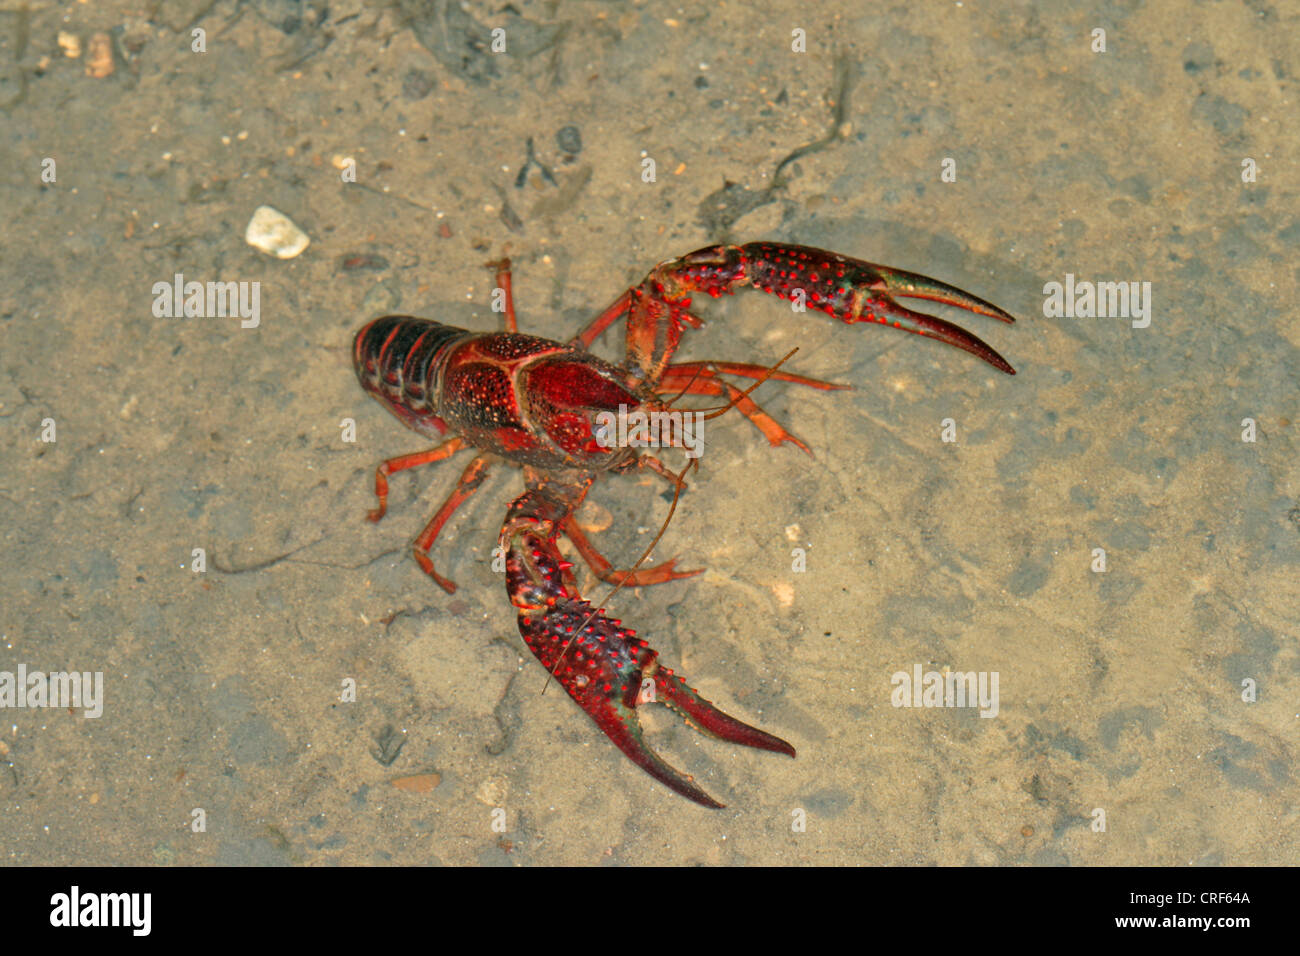 Louisiana red crayfish, red swamp crayfish, Louisiana swamp crayfish, red crayfish (Procambarus clarkii), on sandy ground of a pond Stock Photo